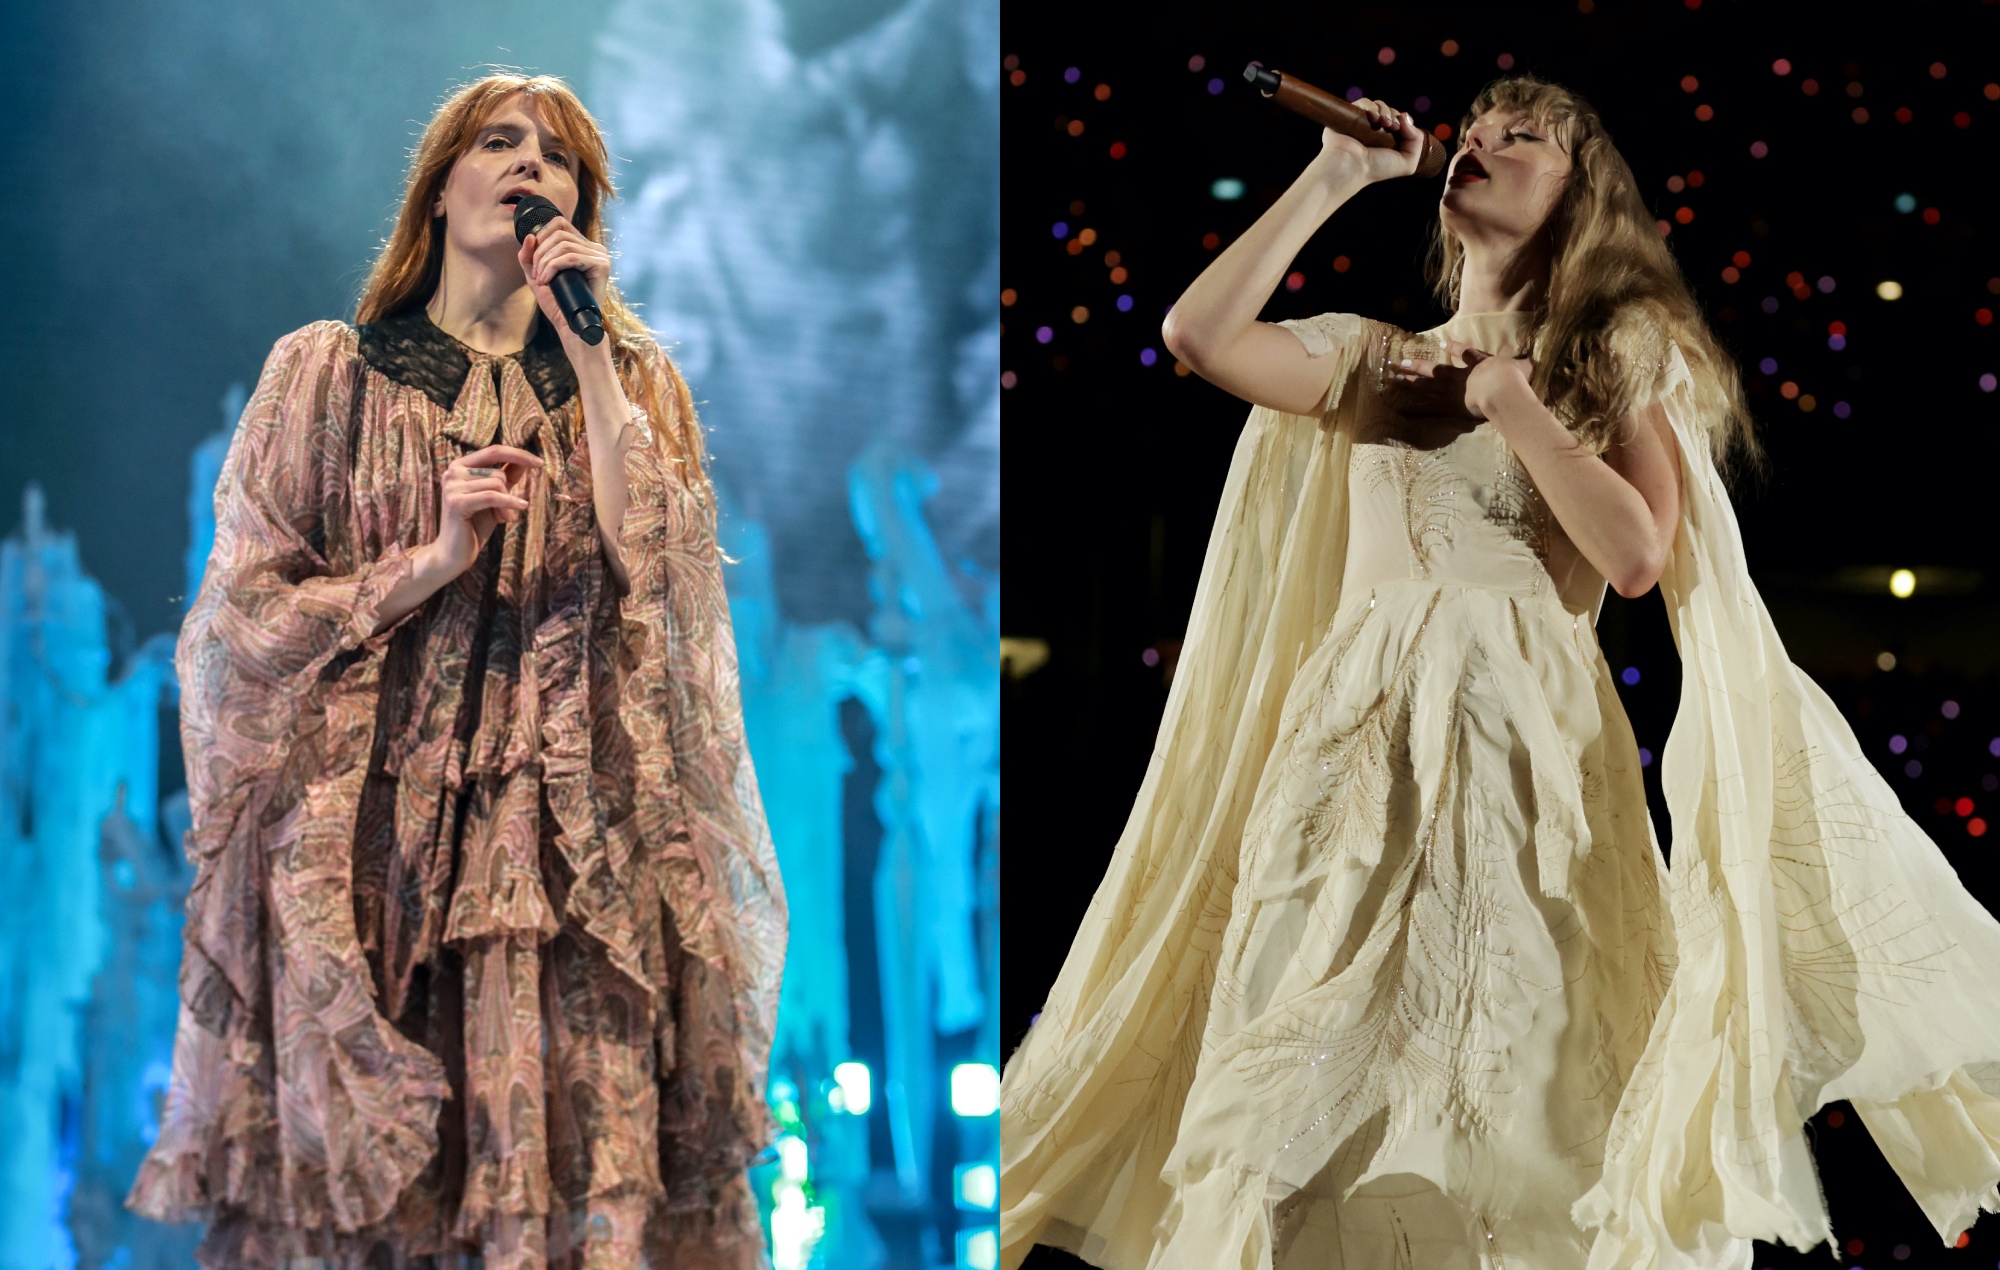 Florence Welch talks Taylor Swift collaboration, hints at ‘Eras Tour’ appearance in London